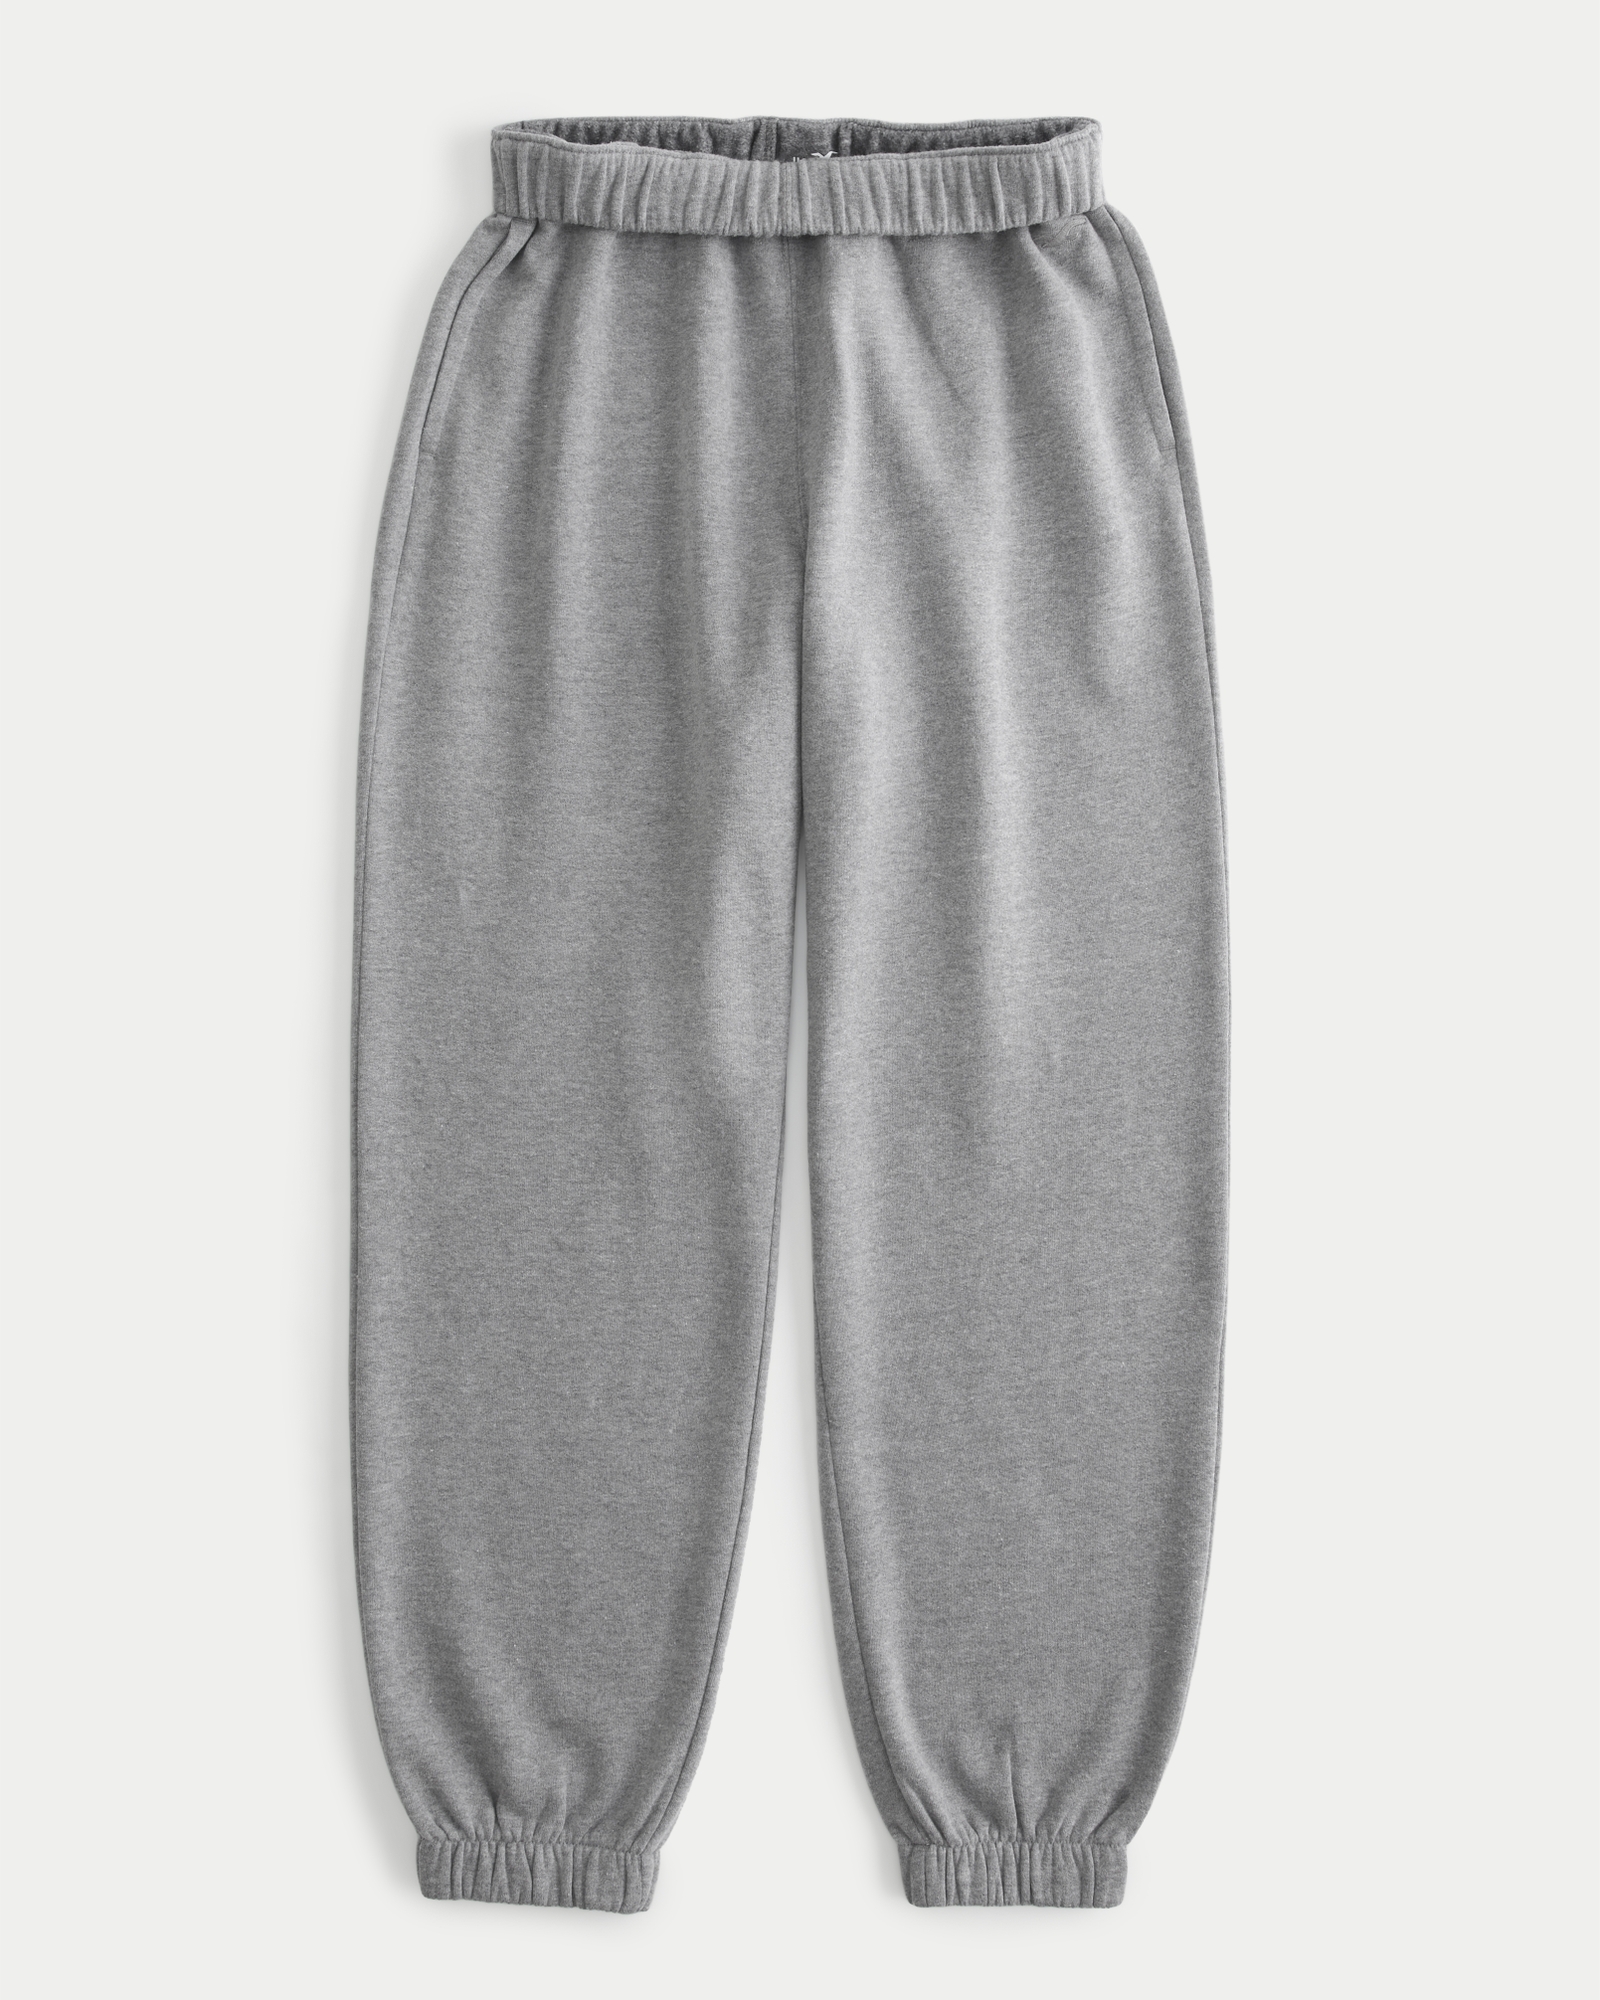 Hollister grey joggers for sale in Co. Wicklow for €15 on DoneDeal